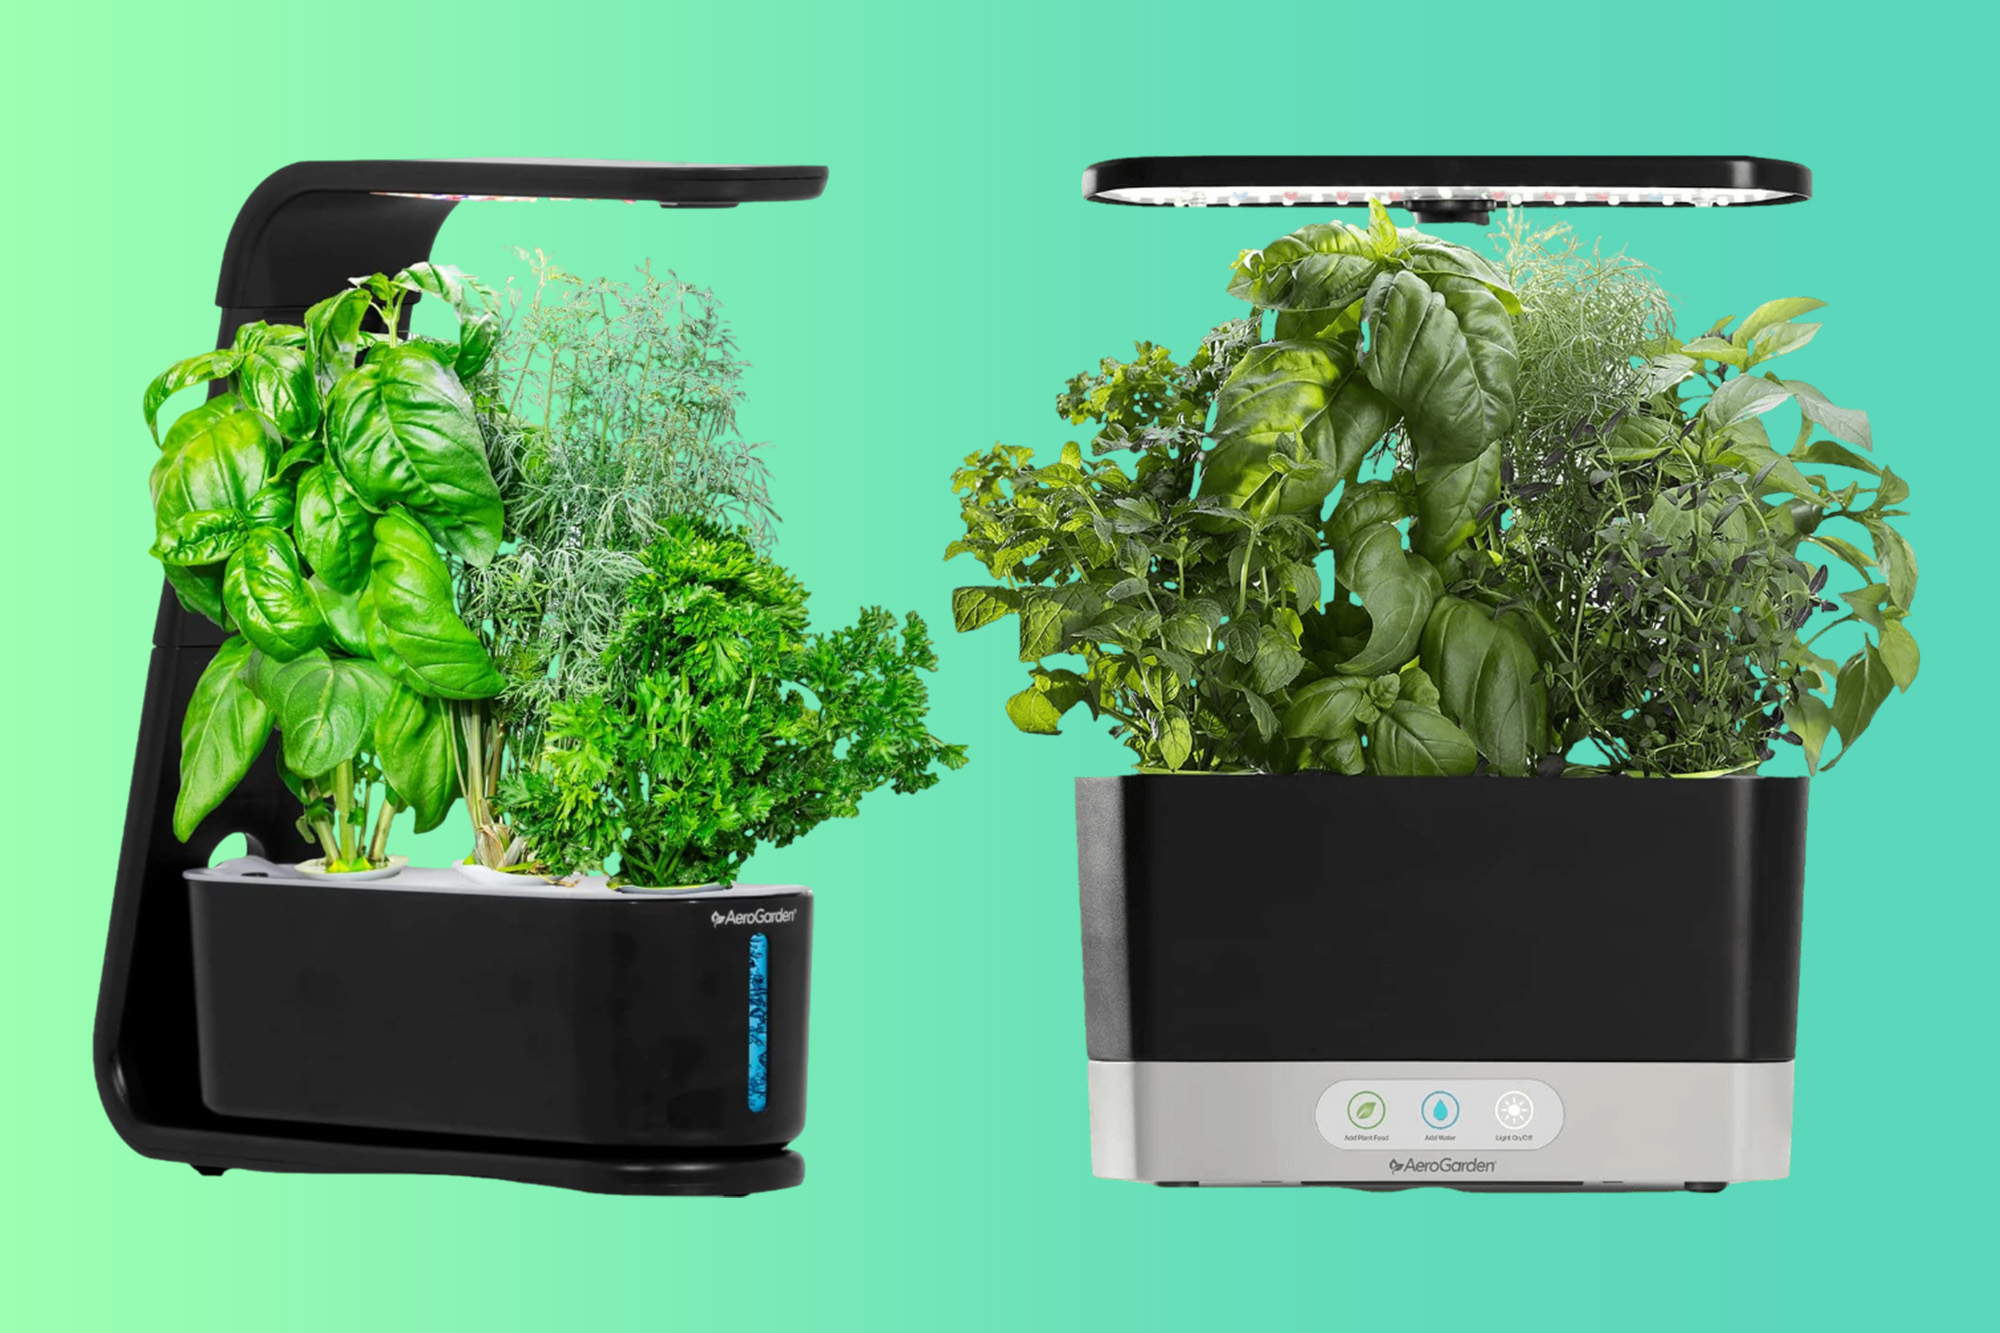 Give Mom the gift of fresh herbs with 60% off an AeroGarden on Amazon